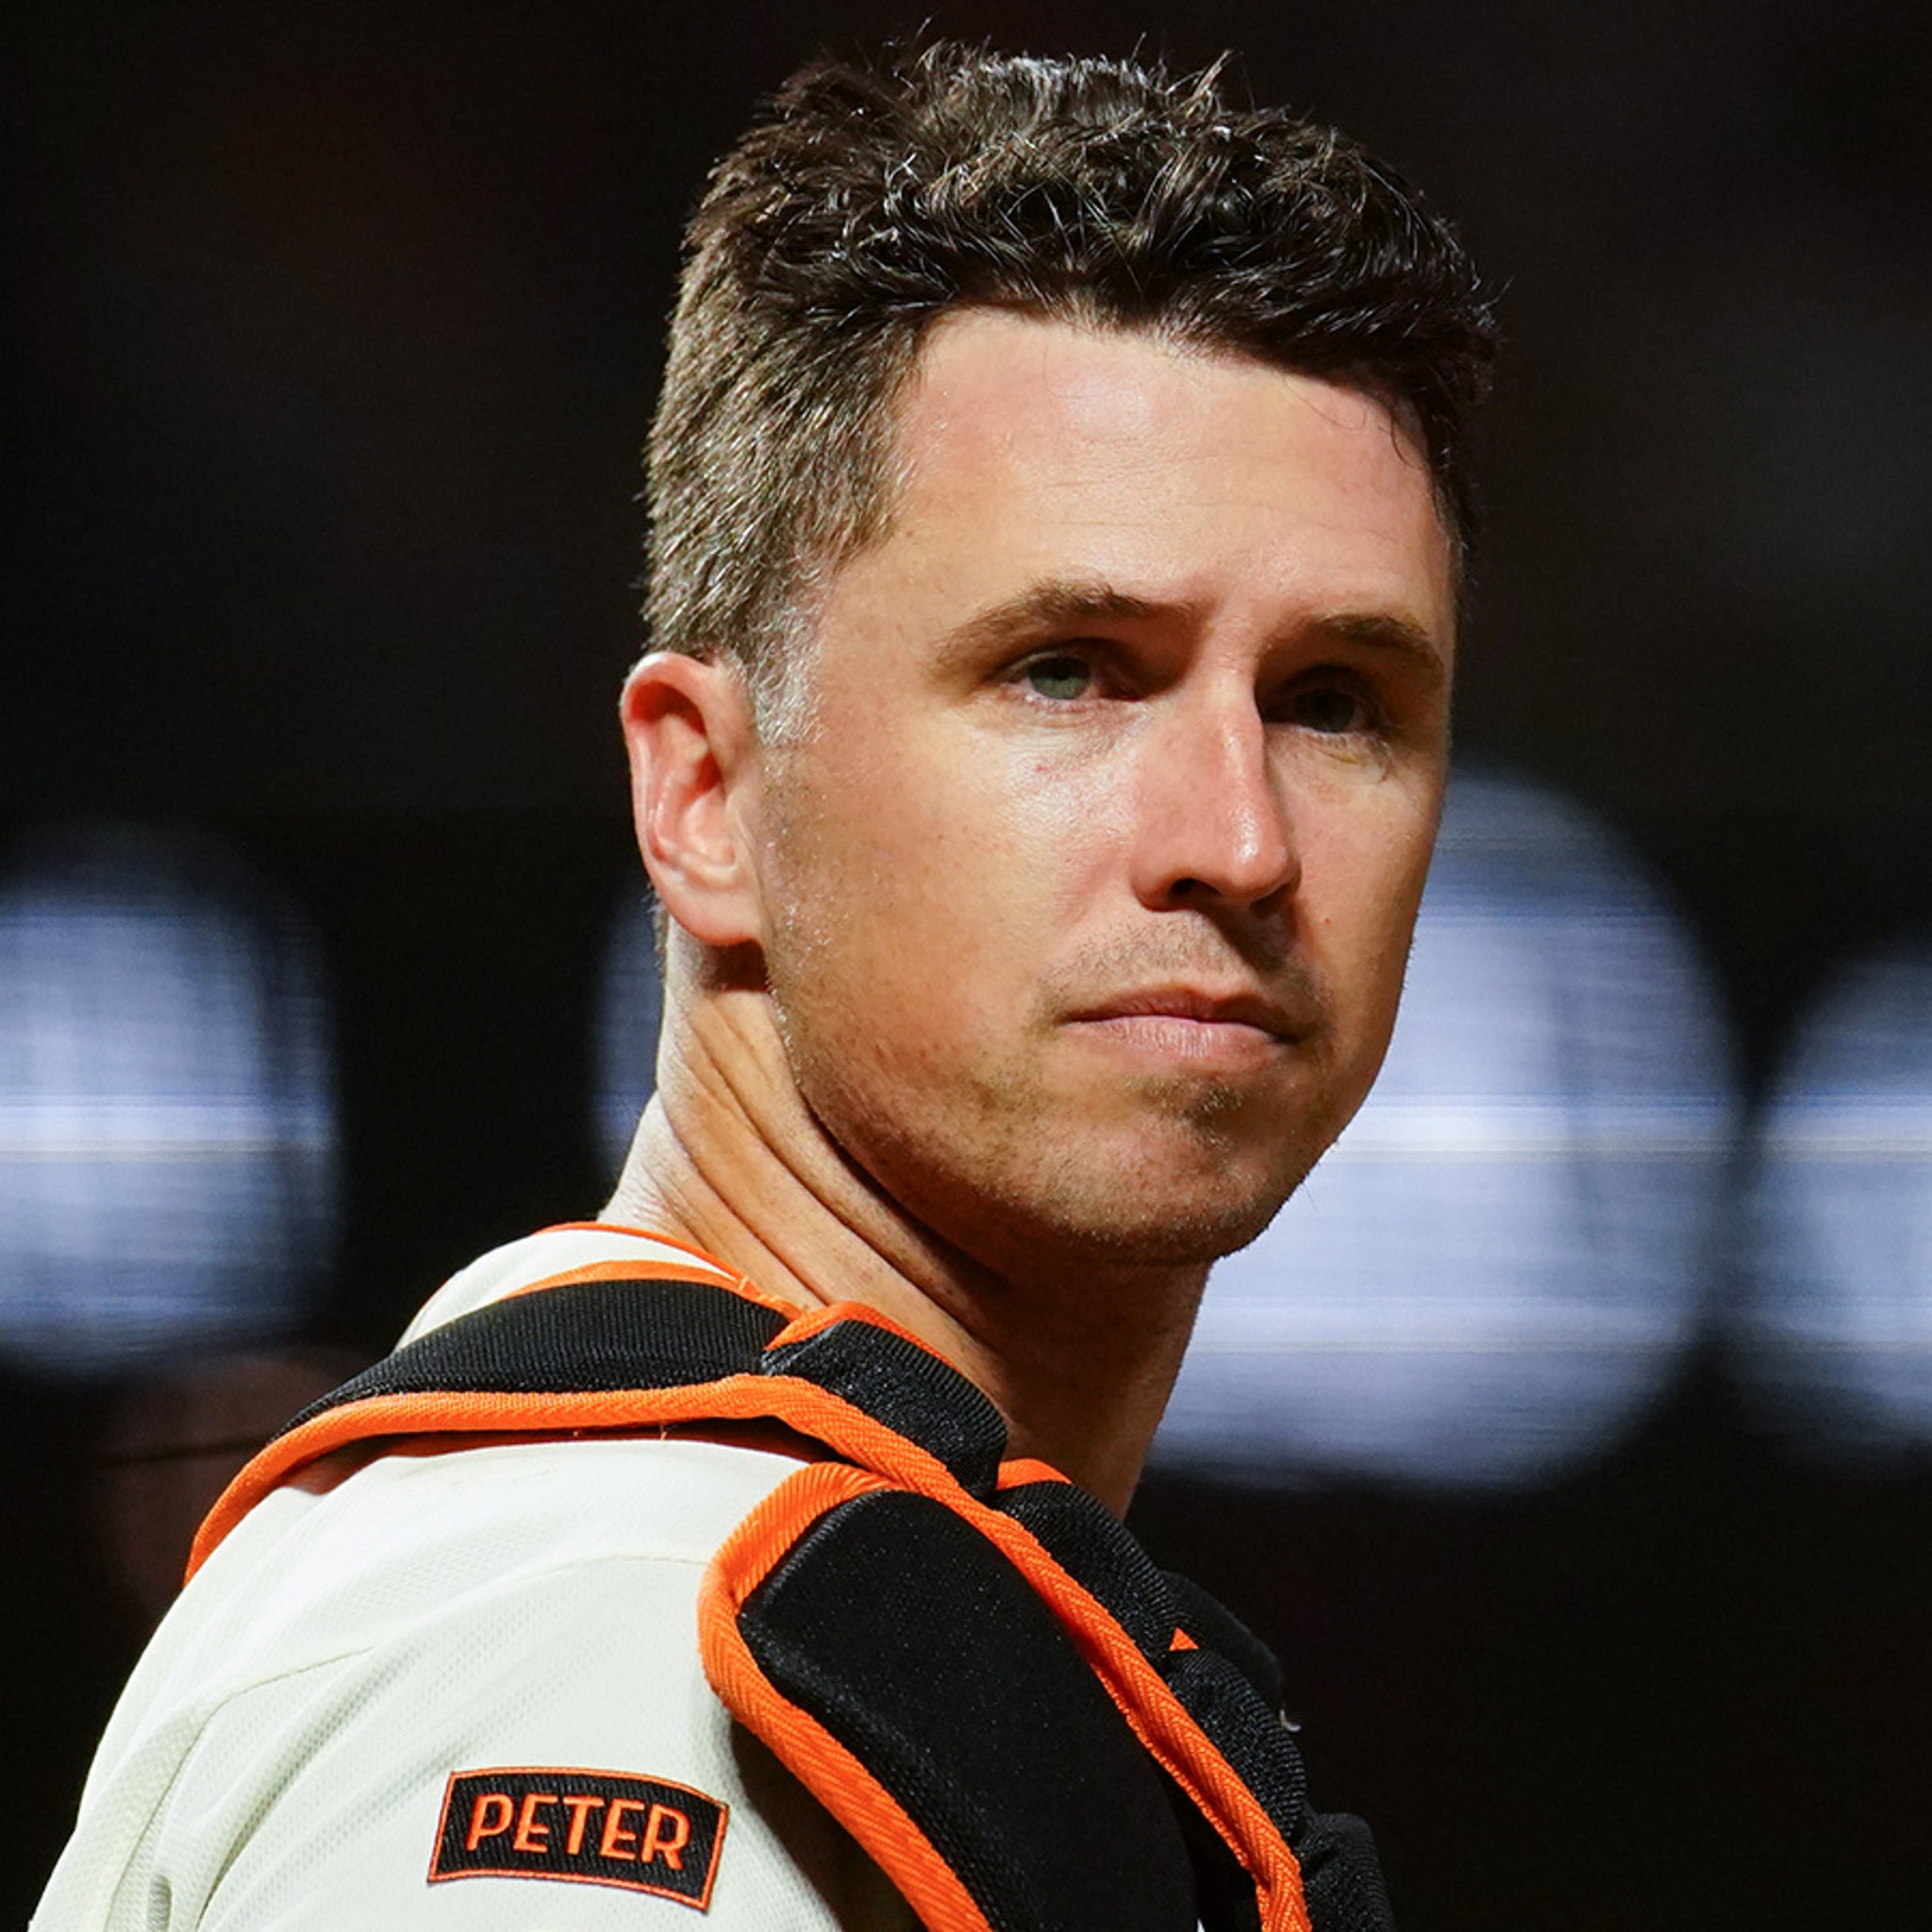 Buster Posey opts out due to adoption of newborn twins